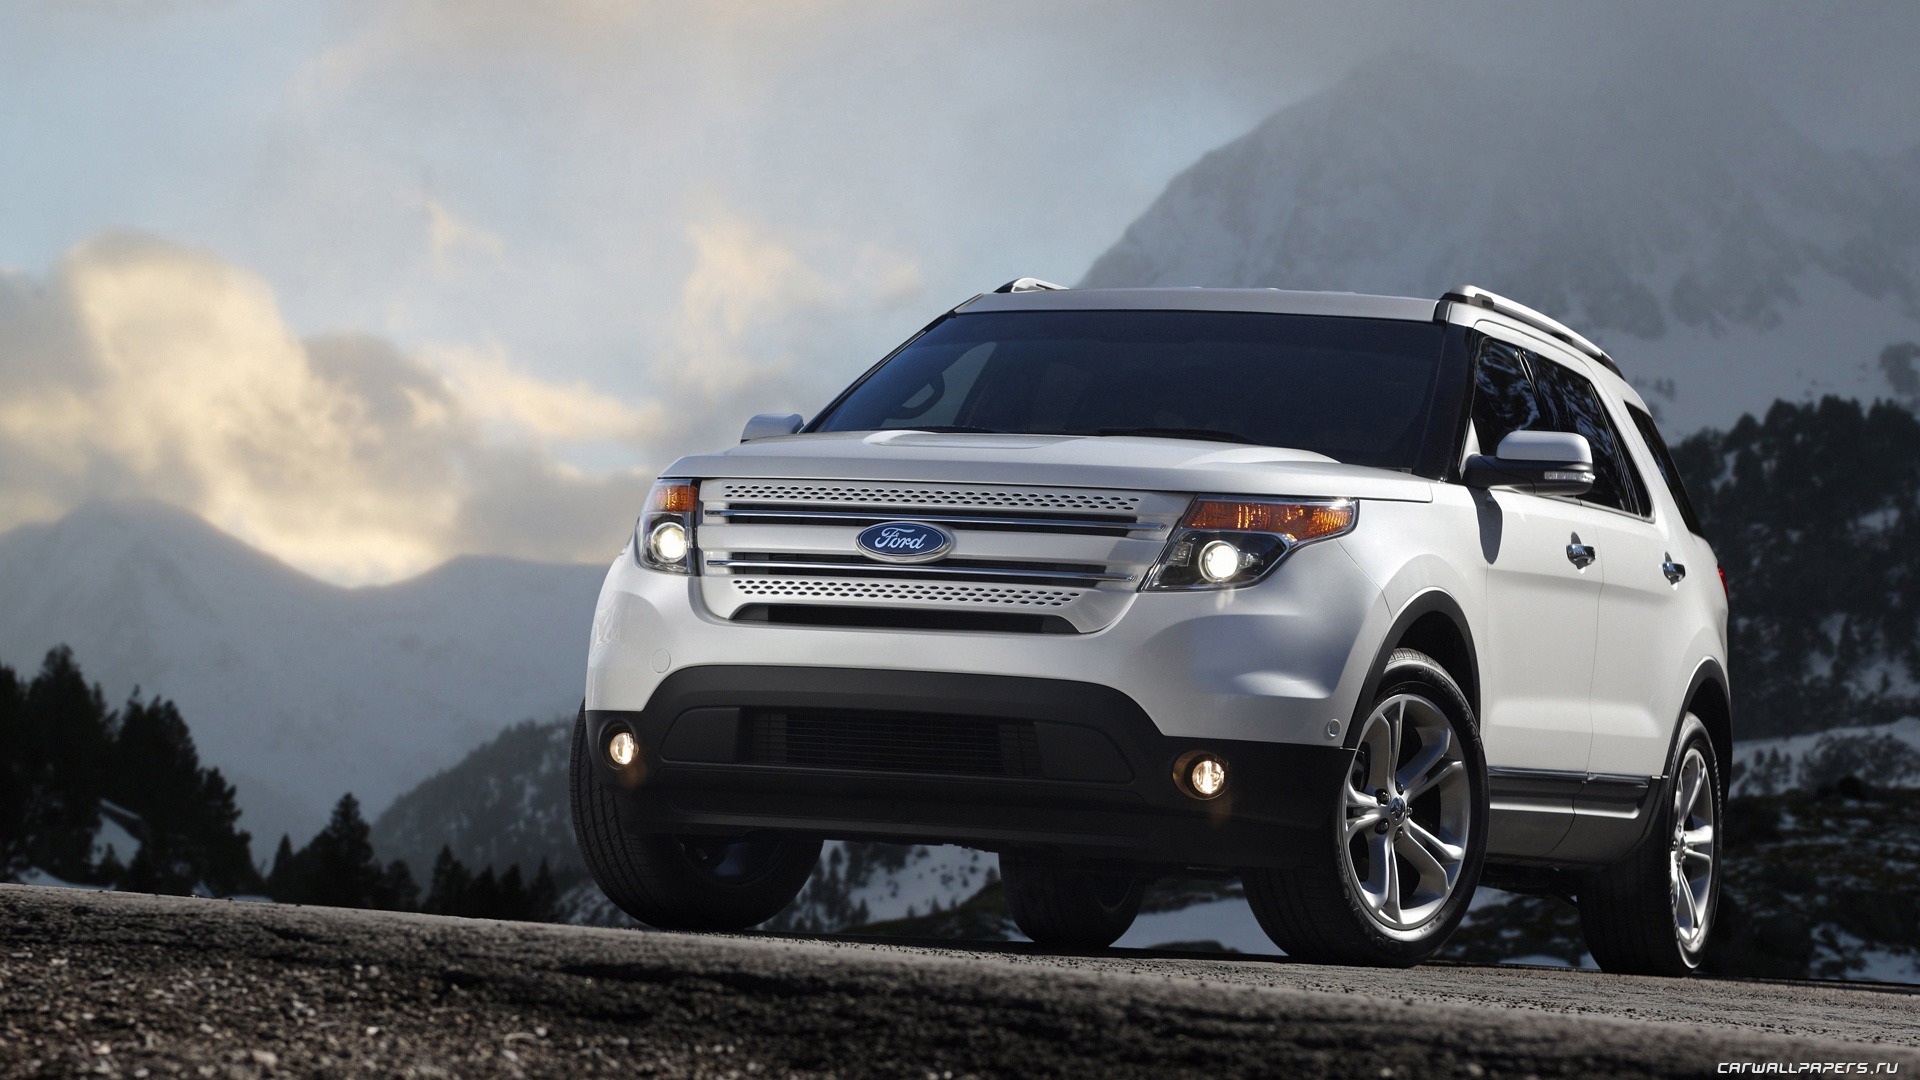 Ford Explorer Limited - 2011 福特 #13 - 1920x1080